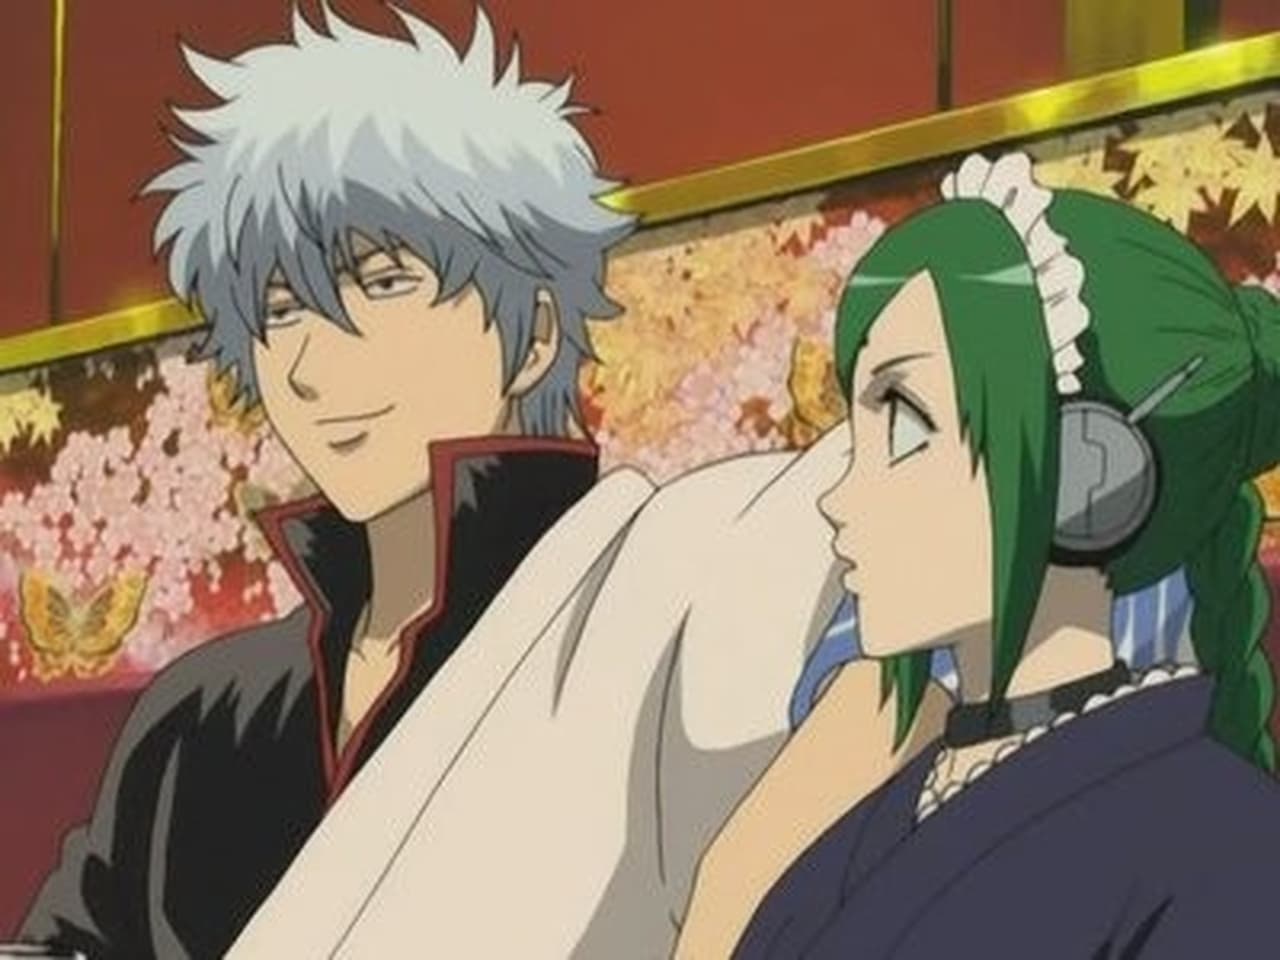 Gintama - Season 3 Episode 13 : A Birthday in Your Twenties Has No Deep Meaning / Lucky Is a Man Who Gets Up and Goes to Work